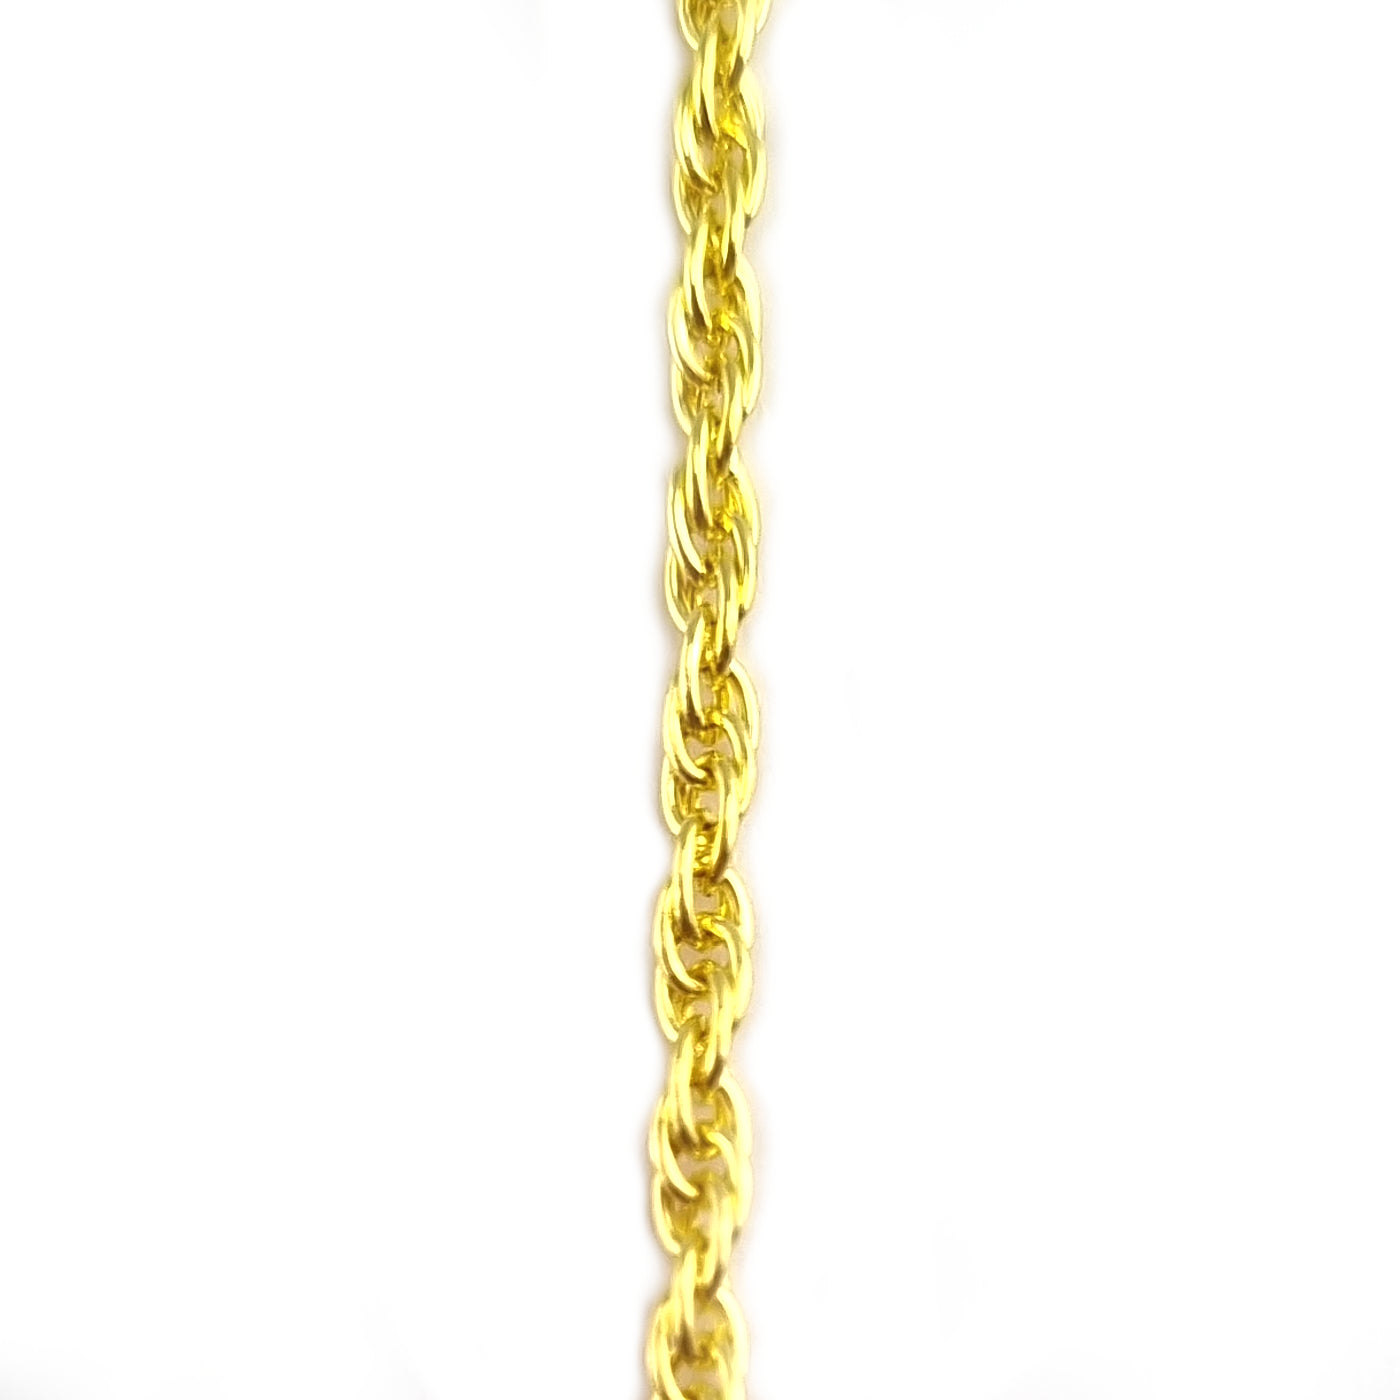 Double Trace Chain - Gold Plated - qty: 25-metres. Shop jewellery chain online. Australia wide shipping. Chain.com.au